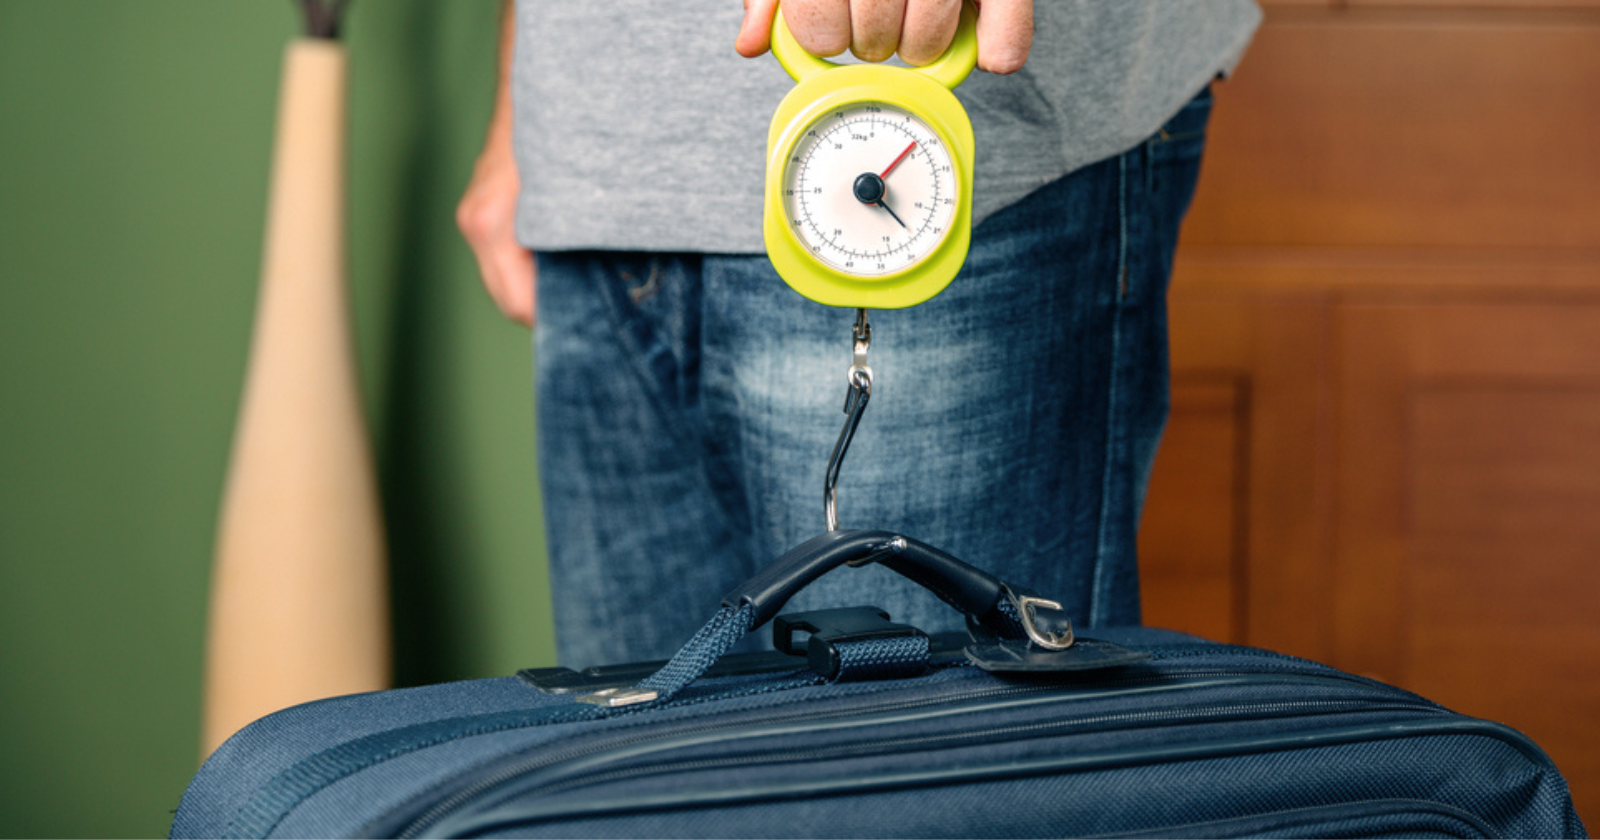 Where To Weigh My Luggage For Free 2